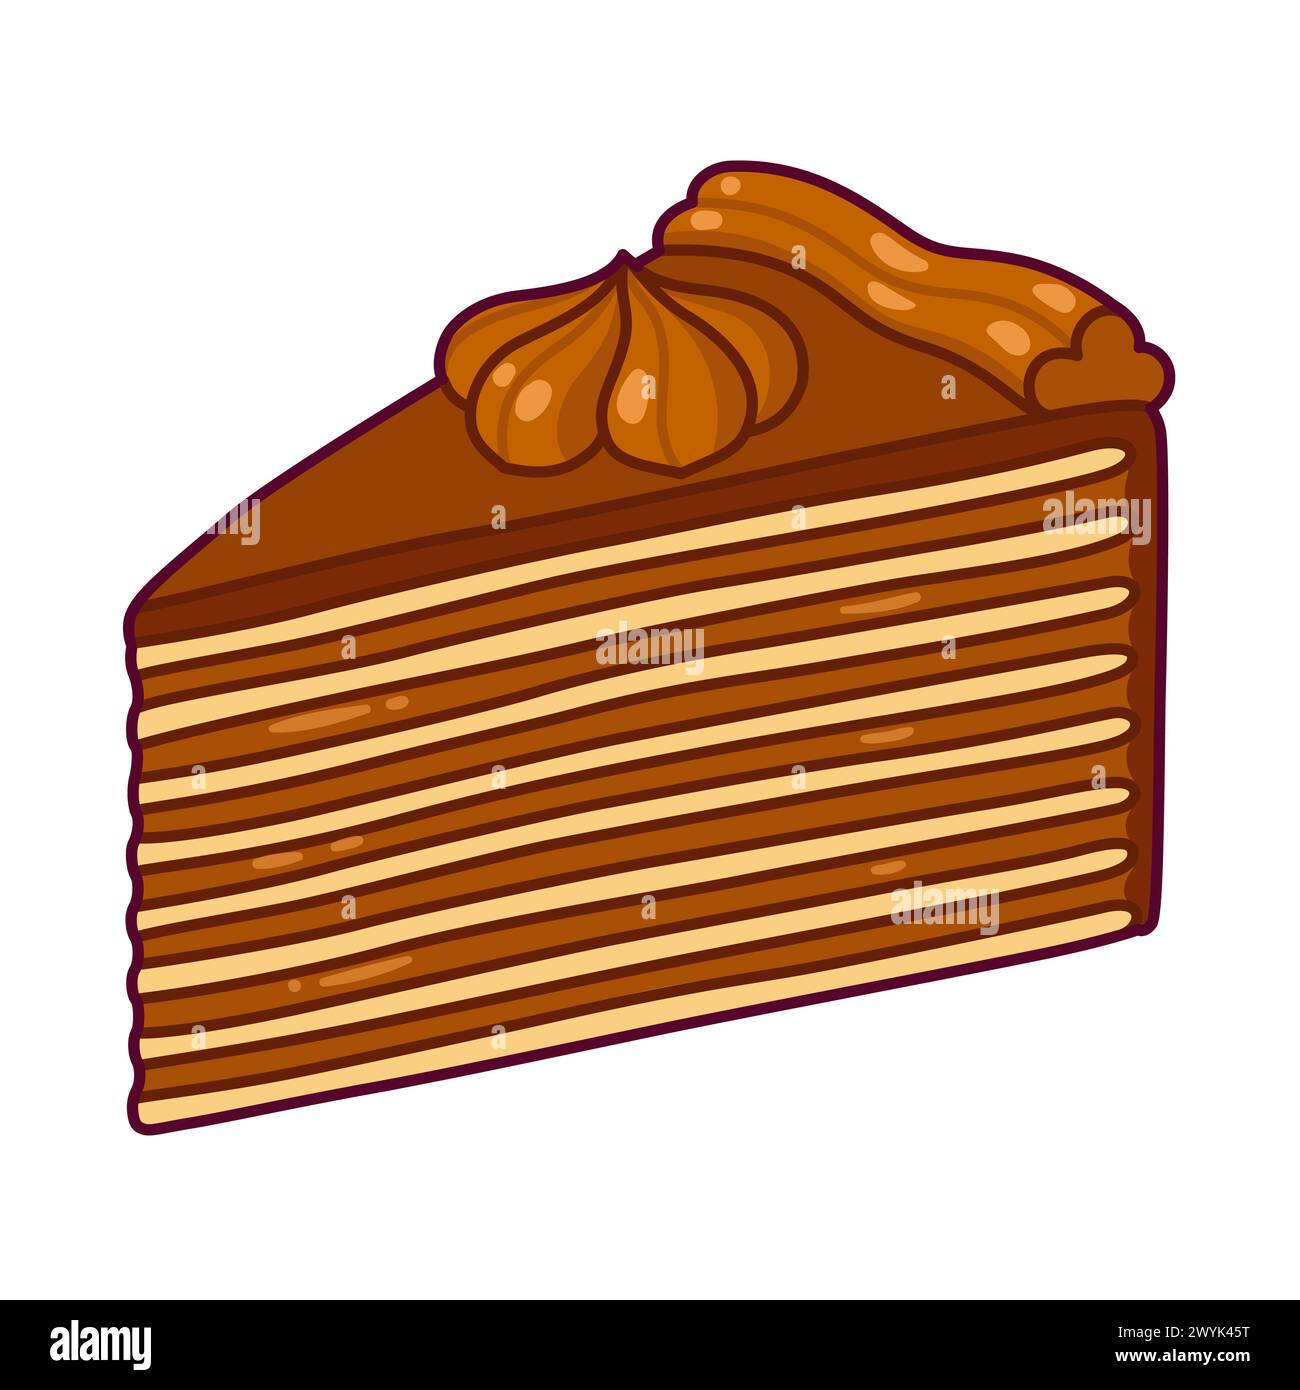 Slice of traditional Chilean Torta Mil Hojas cake. Mille-feuille pastry with many thin layers and dulce de leche (manjar) filling. Cartoon drawing, ve Stock Vector